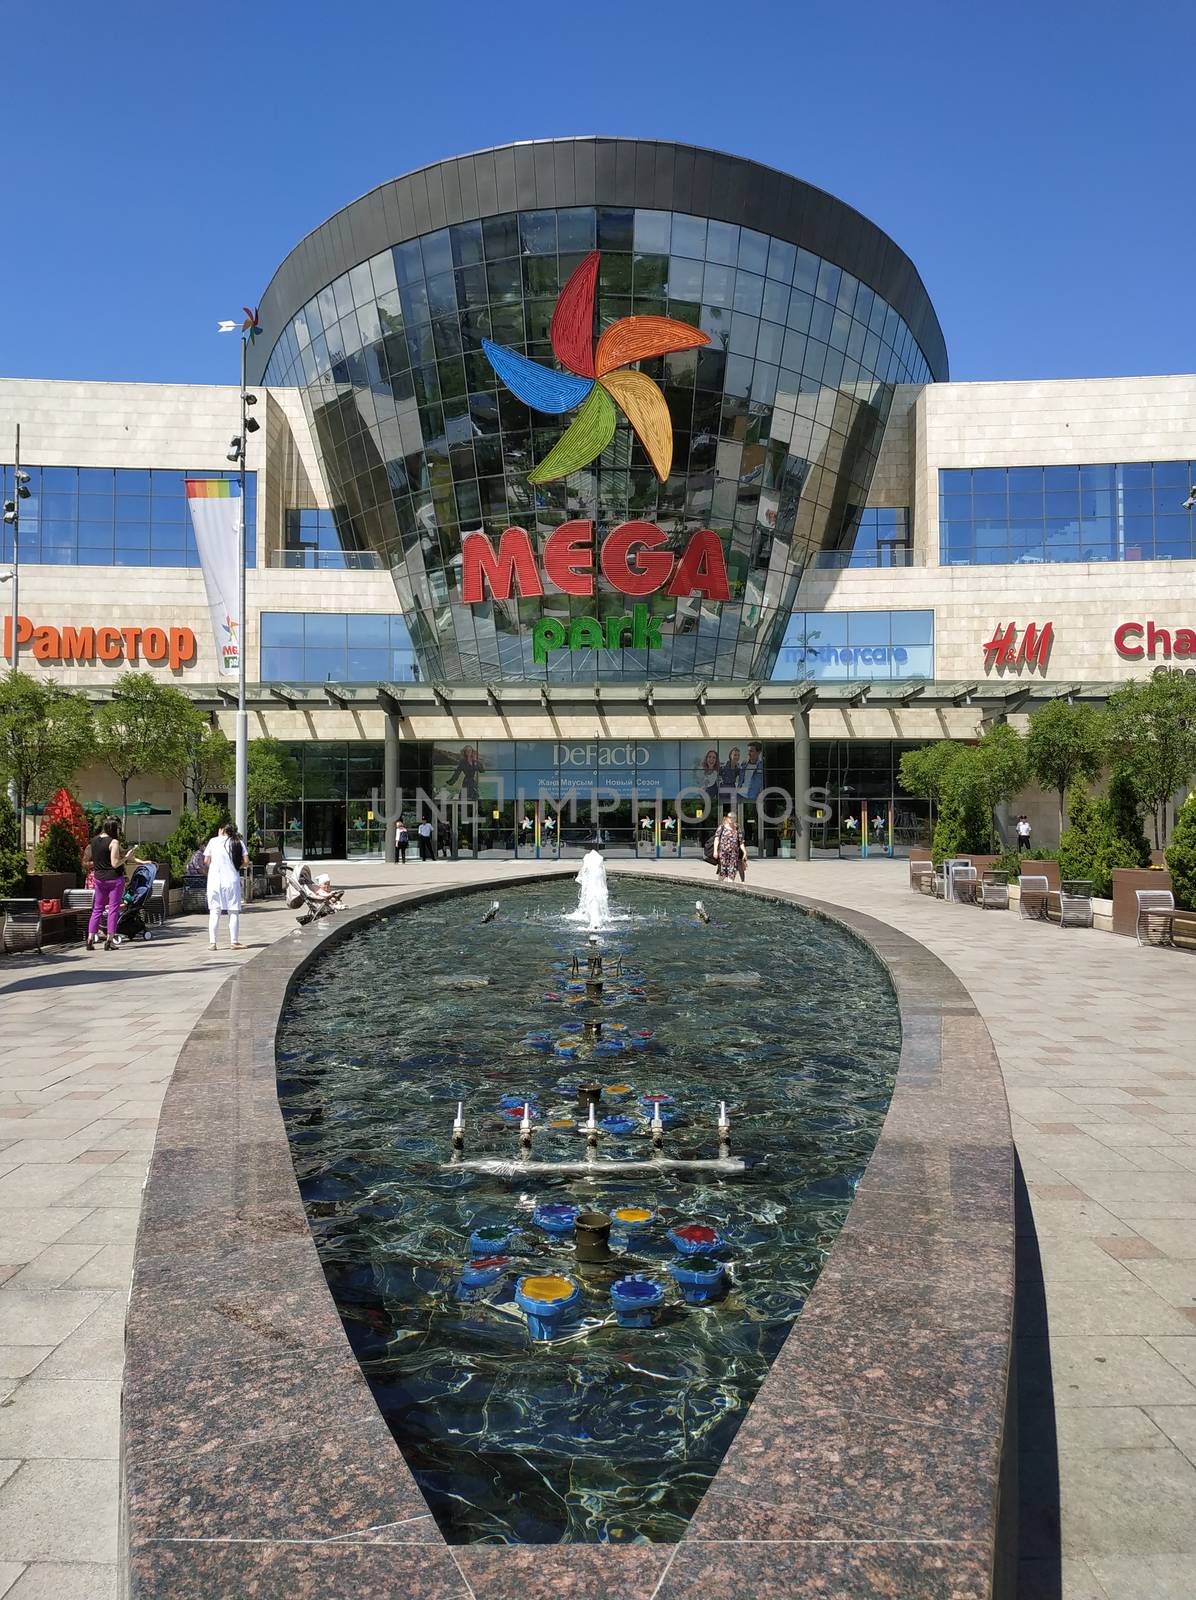 ALMATY, KAZAKHSTAN - June 15, 2019: Shopping and entertainment center Mega Park in Almaty, Kazakhstan. Opened in 2015, it is the largest department store in Almaty. Unidentified people are outside.